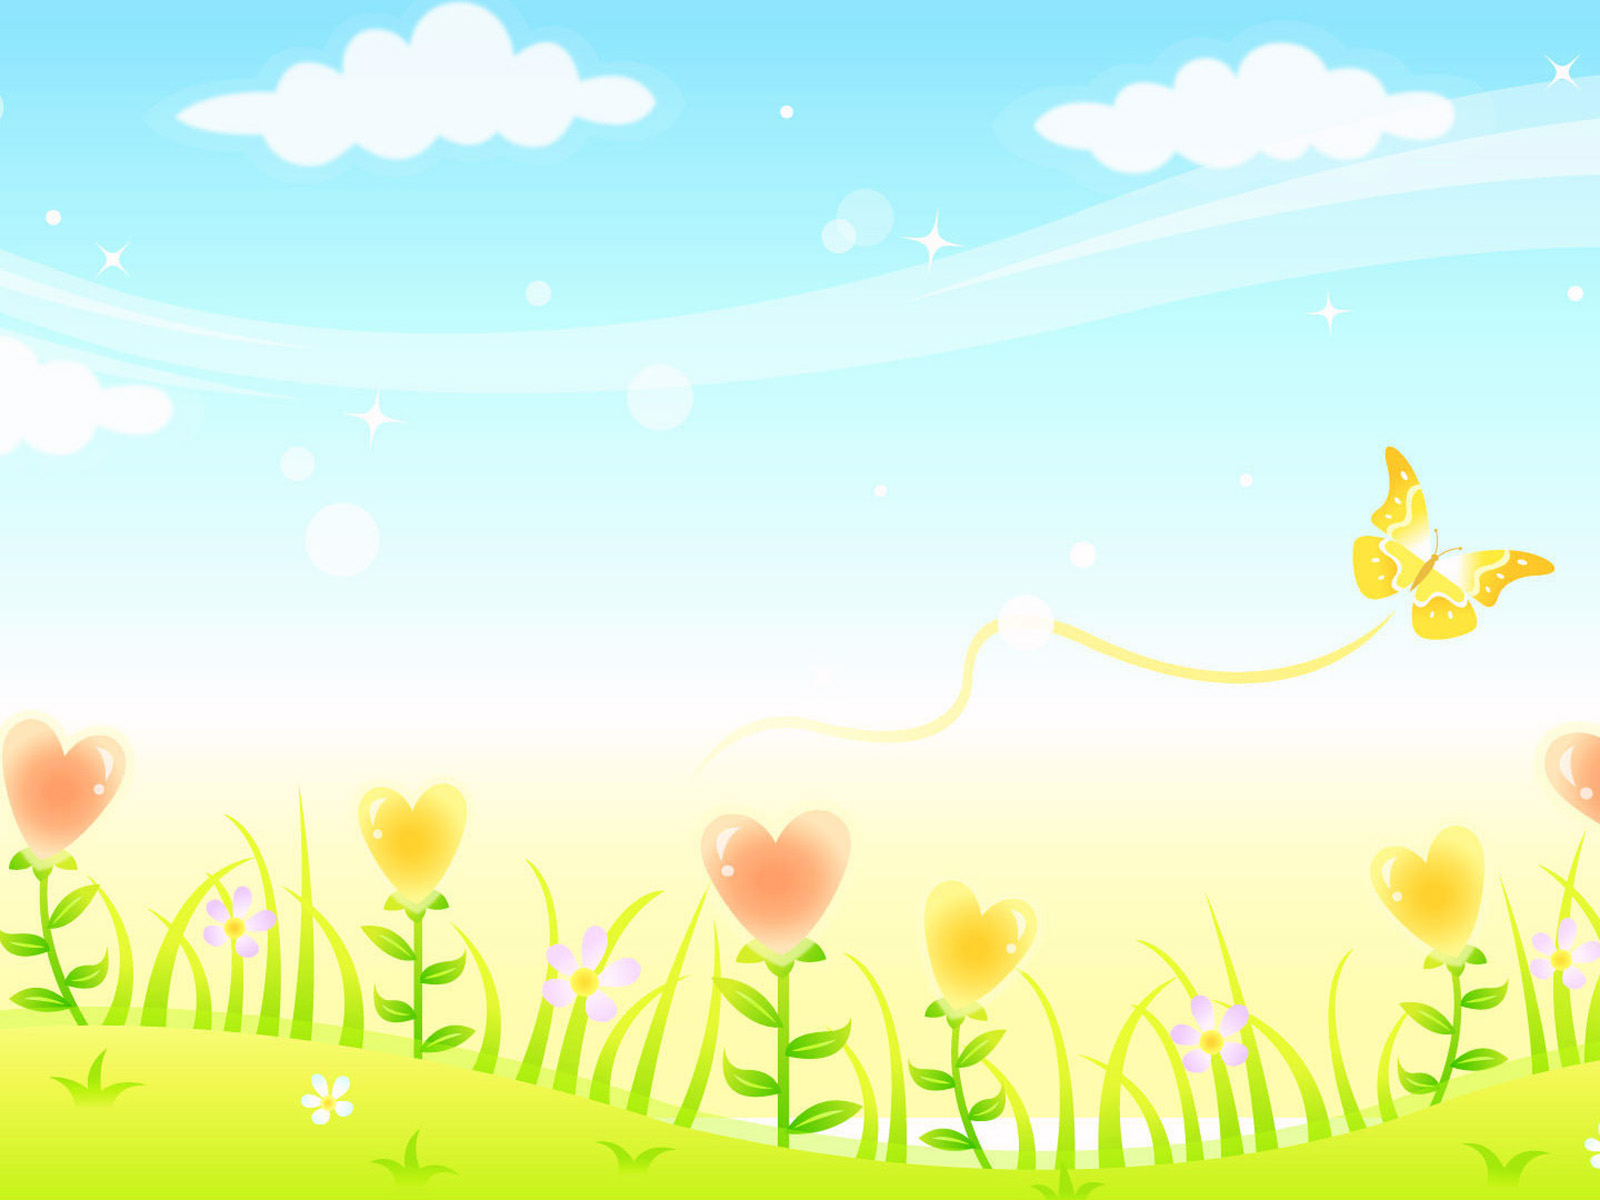 April 4, 2013 PPT Backgrounds - Powerpoint Backgrounds